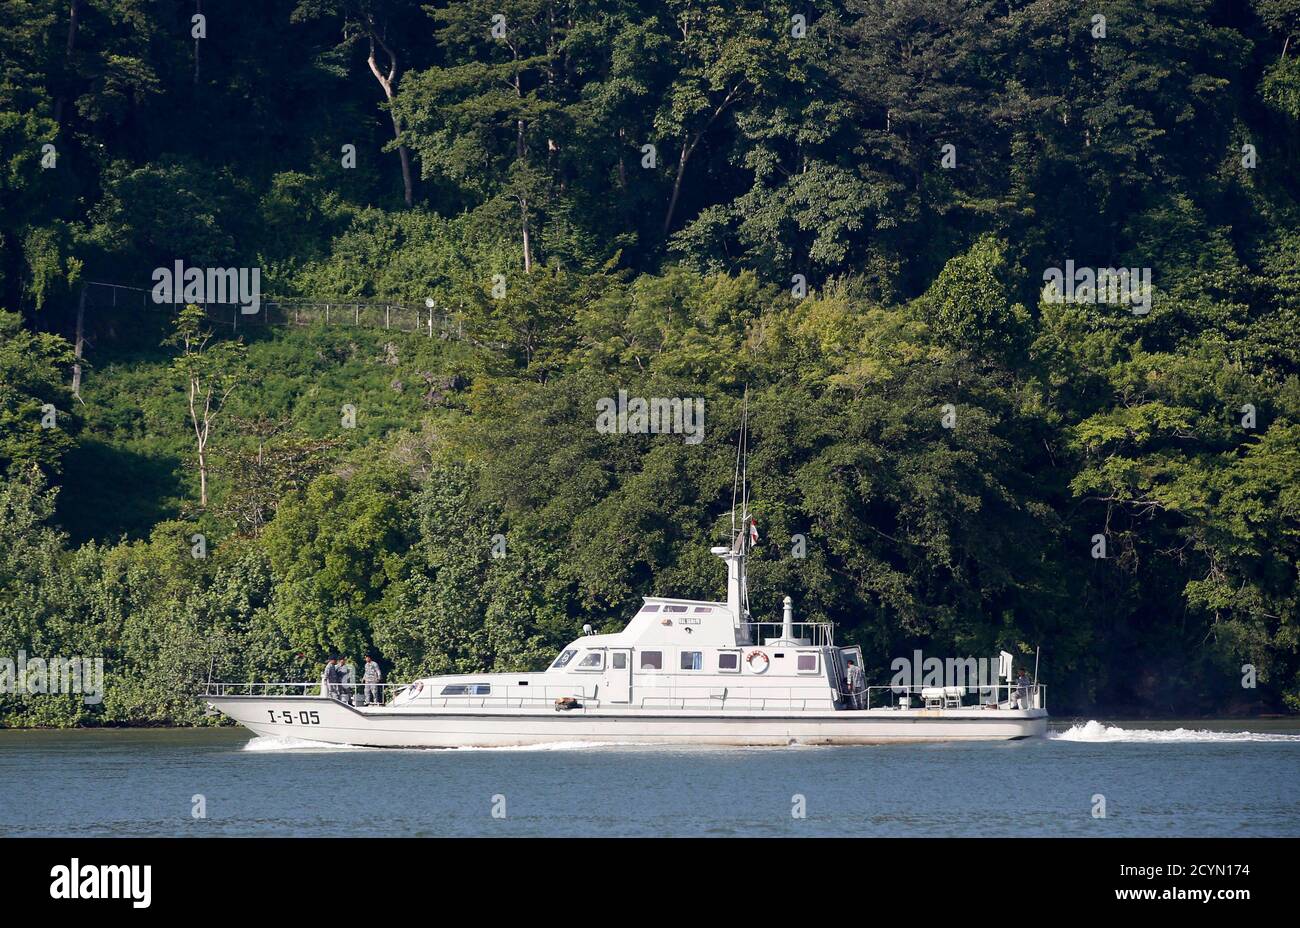 smør Politibetjent Vise dig An Indonesian patrol boat sails near the prison island of Nusakambangan  (background) where upcoming executions are expected to take place, in  Cilacap Central Java, March 9, 2015. Australia will reiterate its opposition